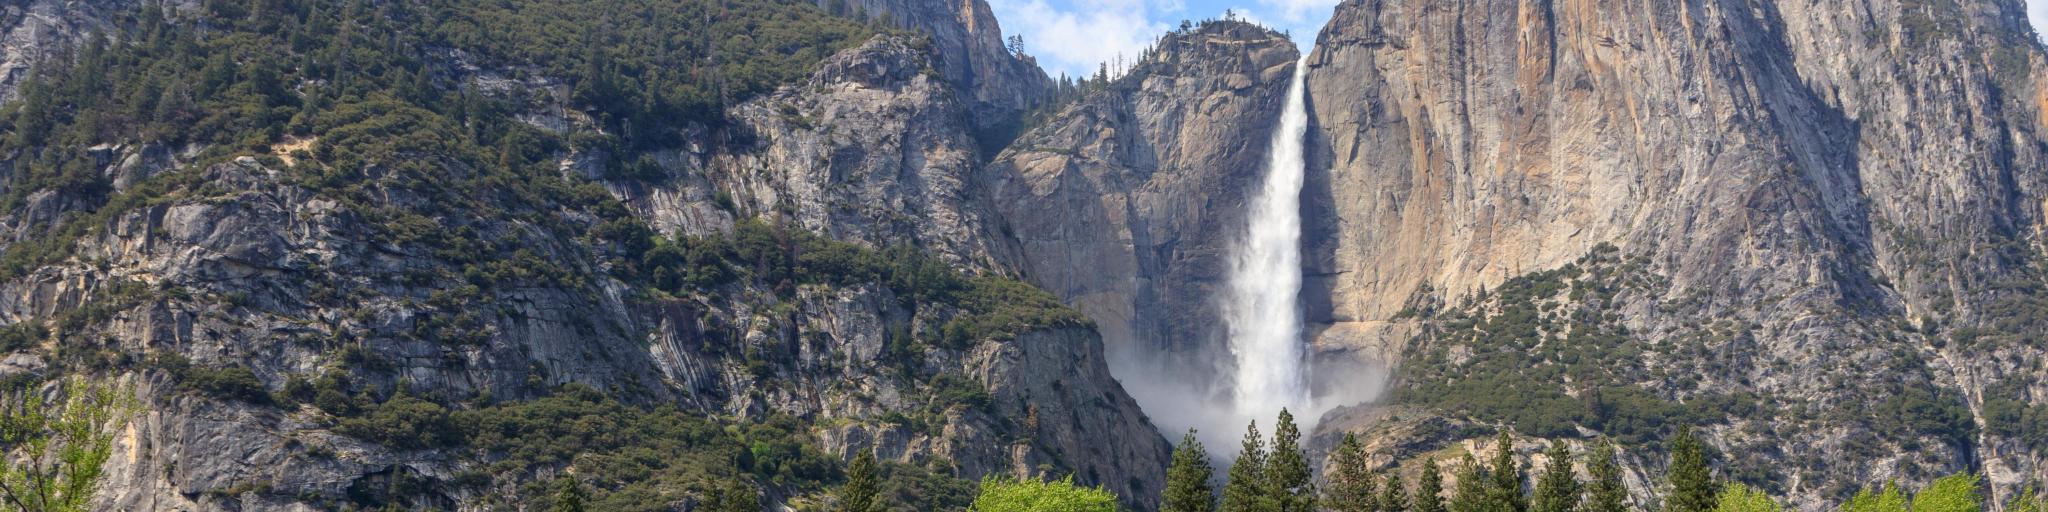 View of Bridalveil Fall with forests in the foreground, and blue skies overhead